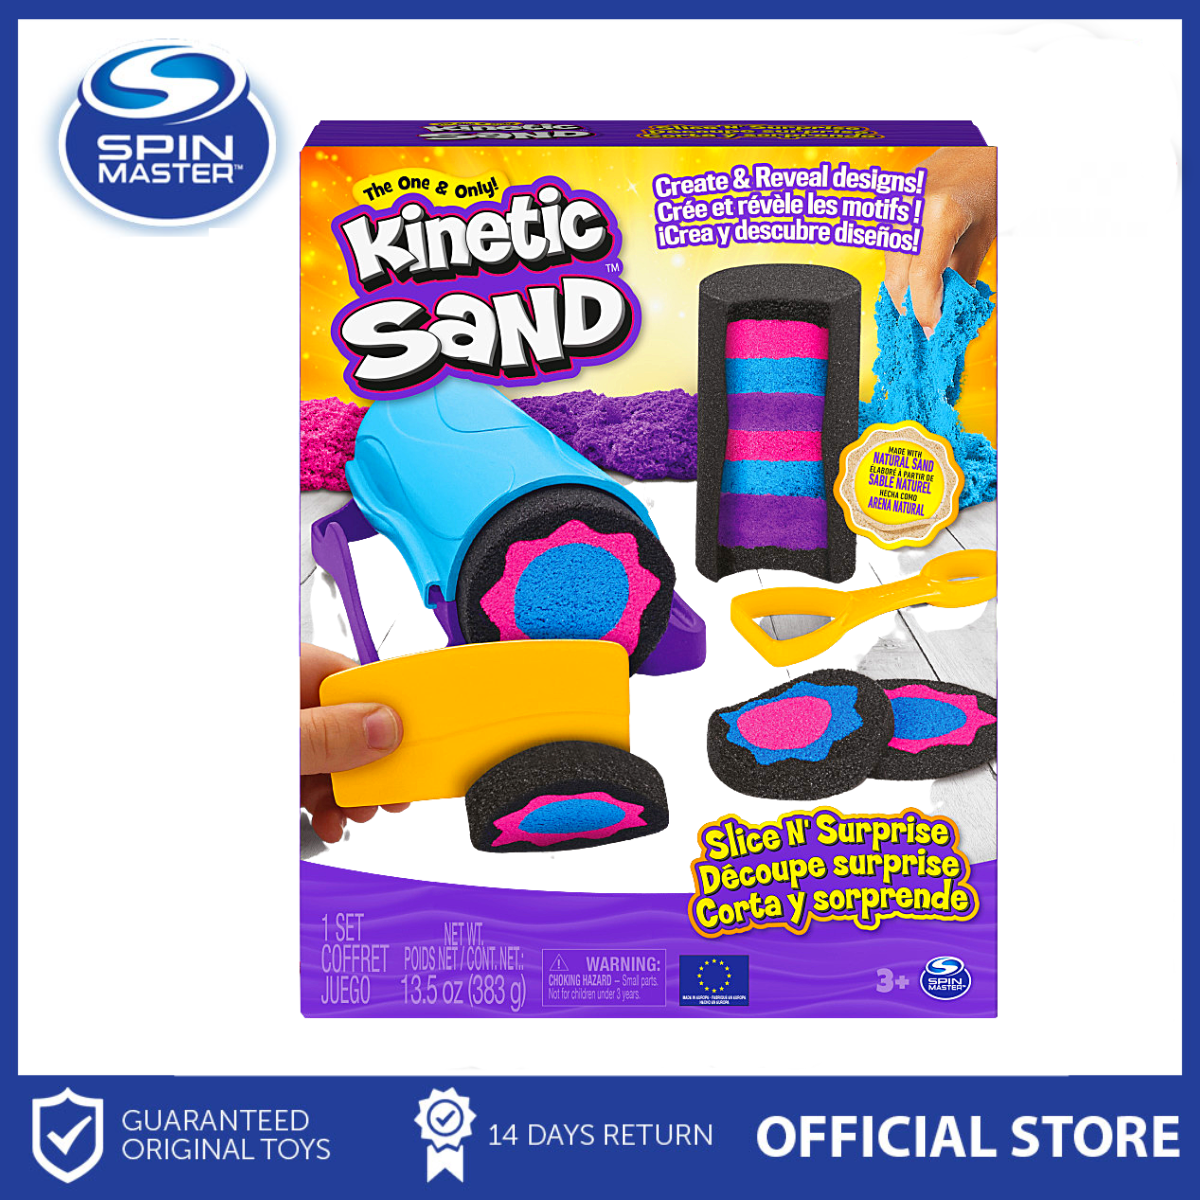 Kinetic Sand, Sandwhirlz Playset with 3 Colors of Kinetic Sand (2lbs) and  Over 10 Tools, Play Sand Sensory Toys for Kids Aged 3 and up